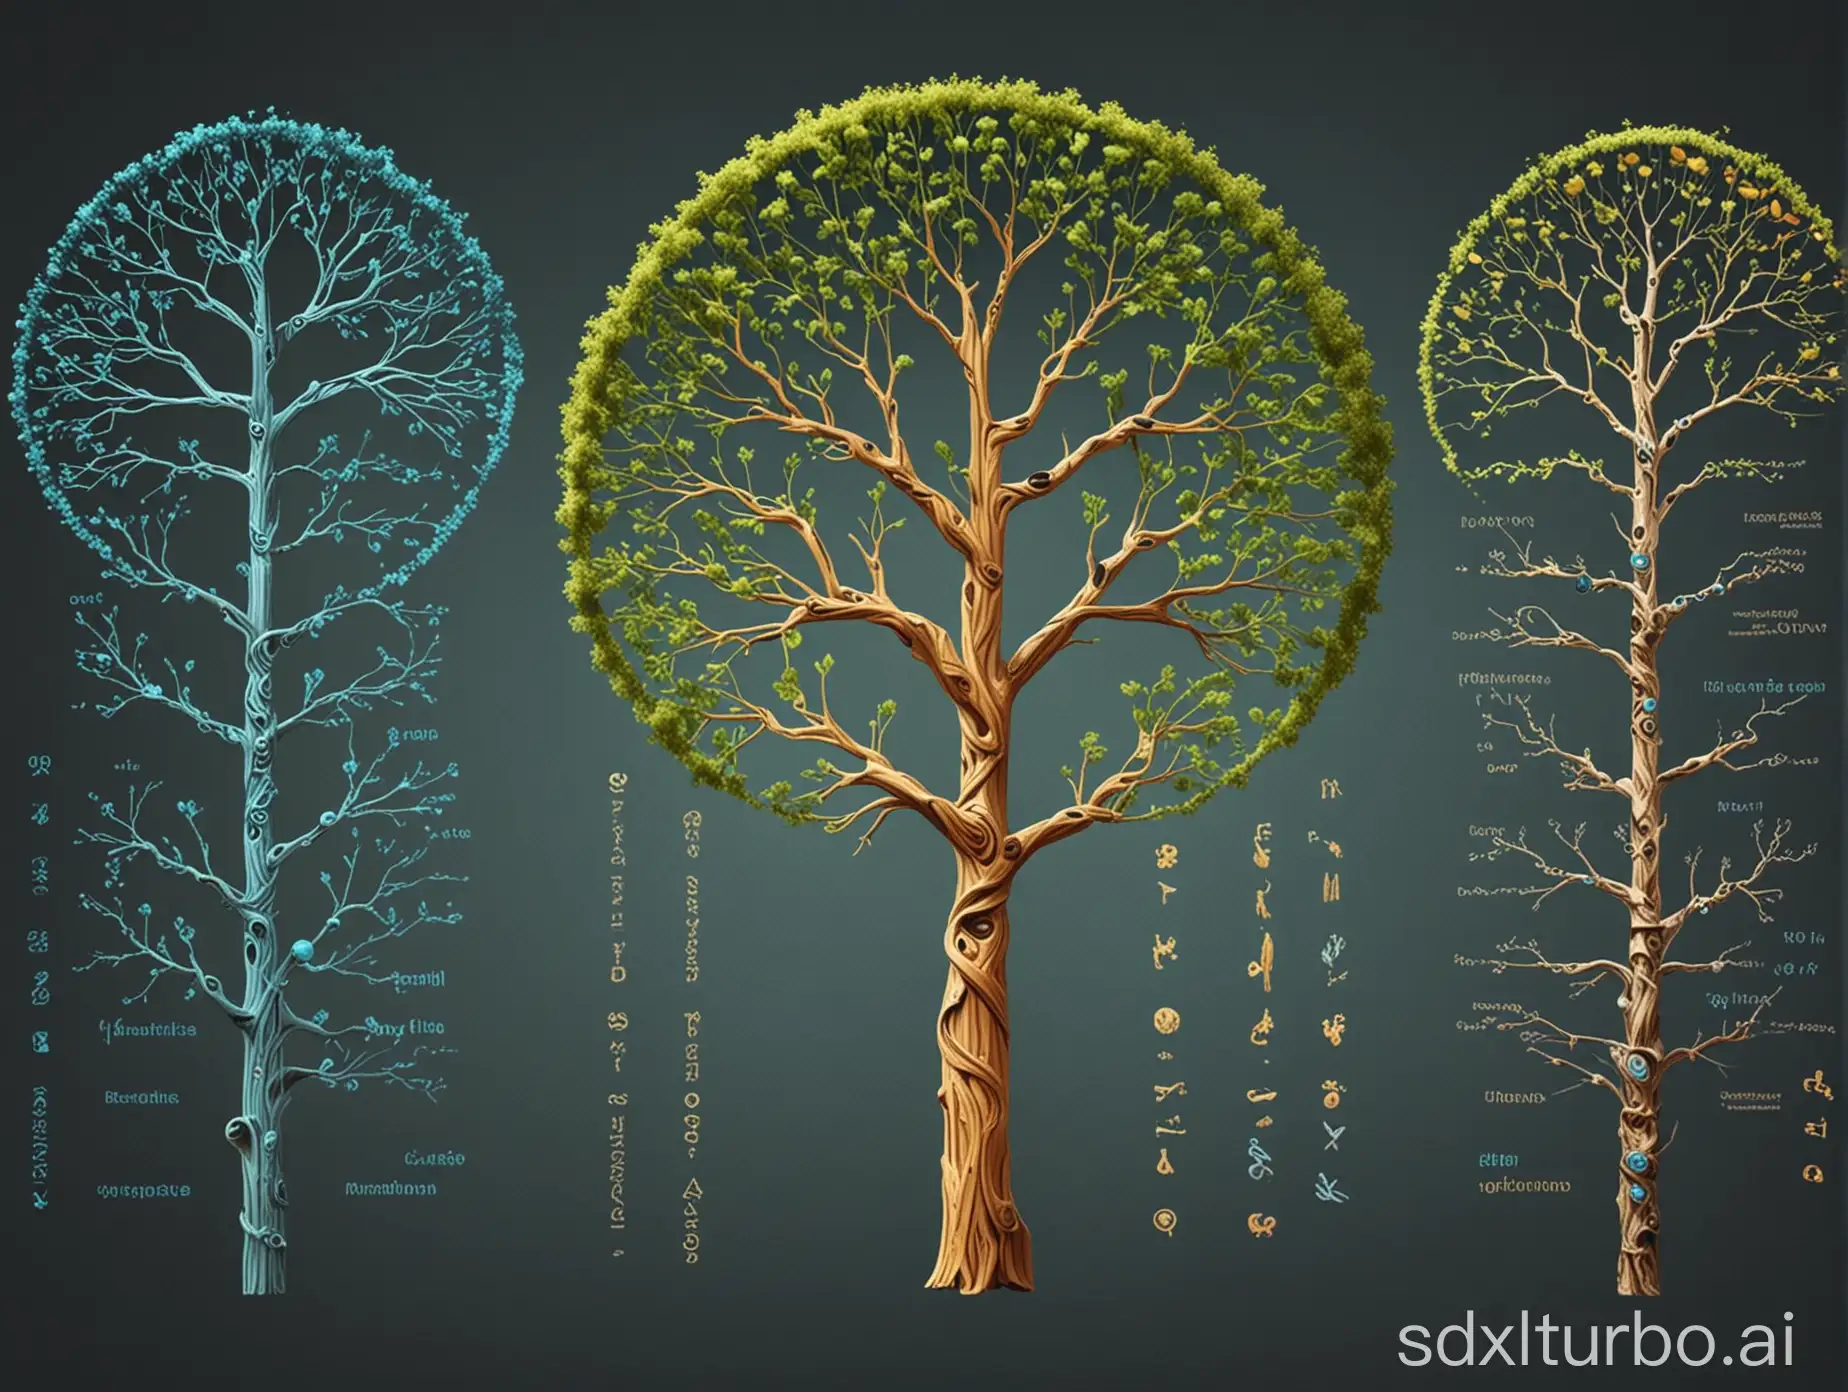 Phylogenetic-Trees-and-DNA-Strands-Artwork